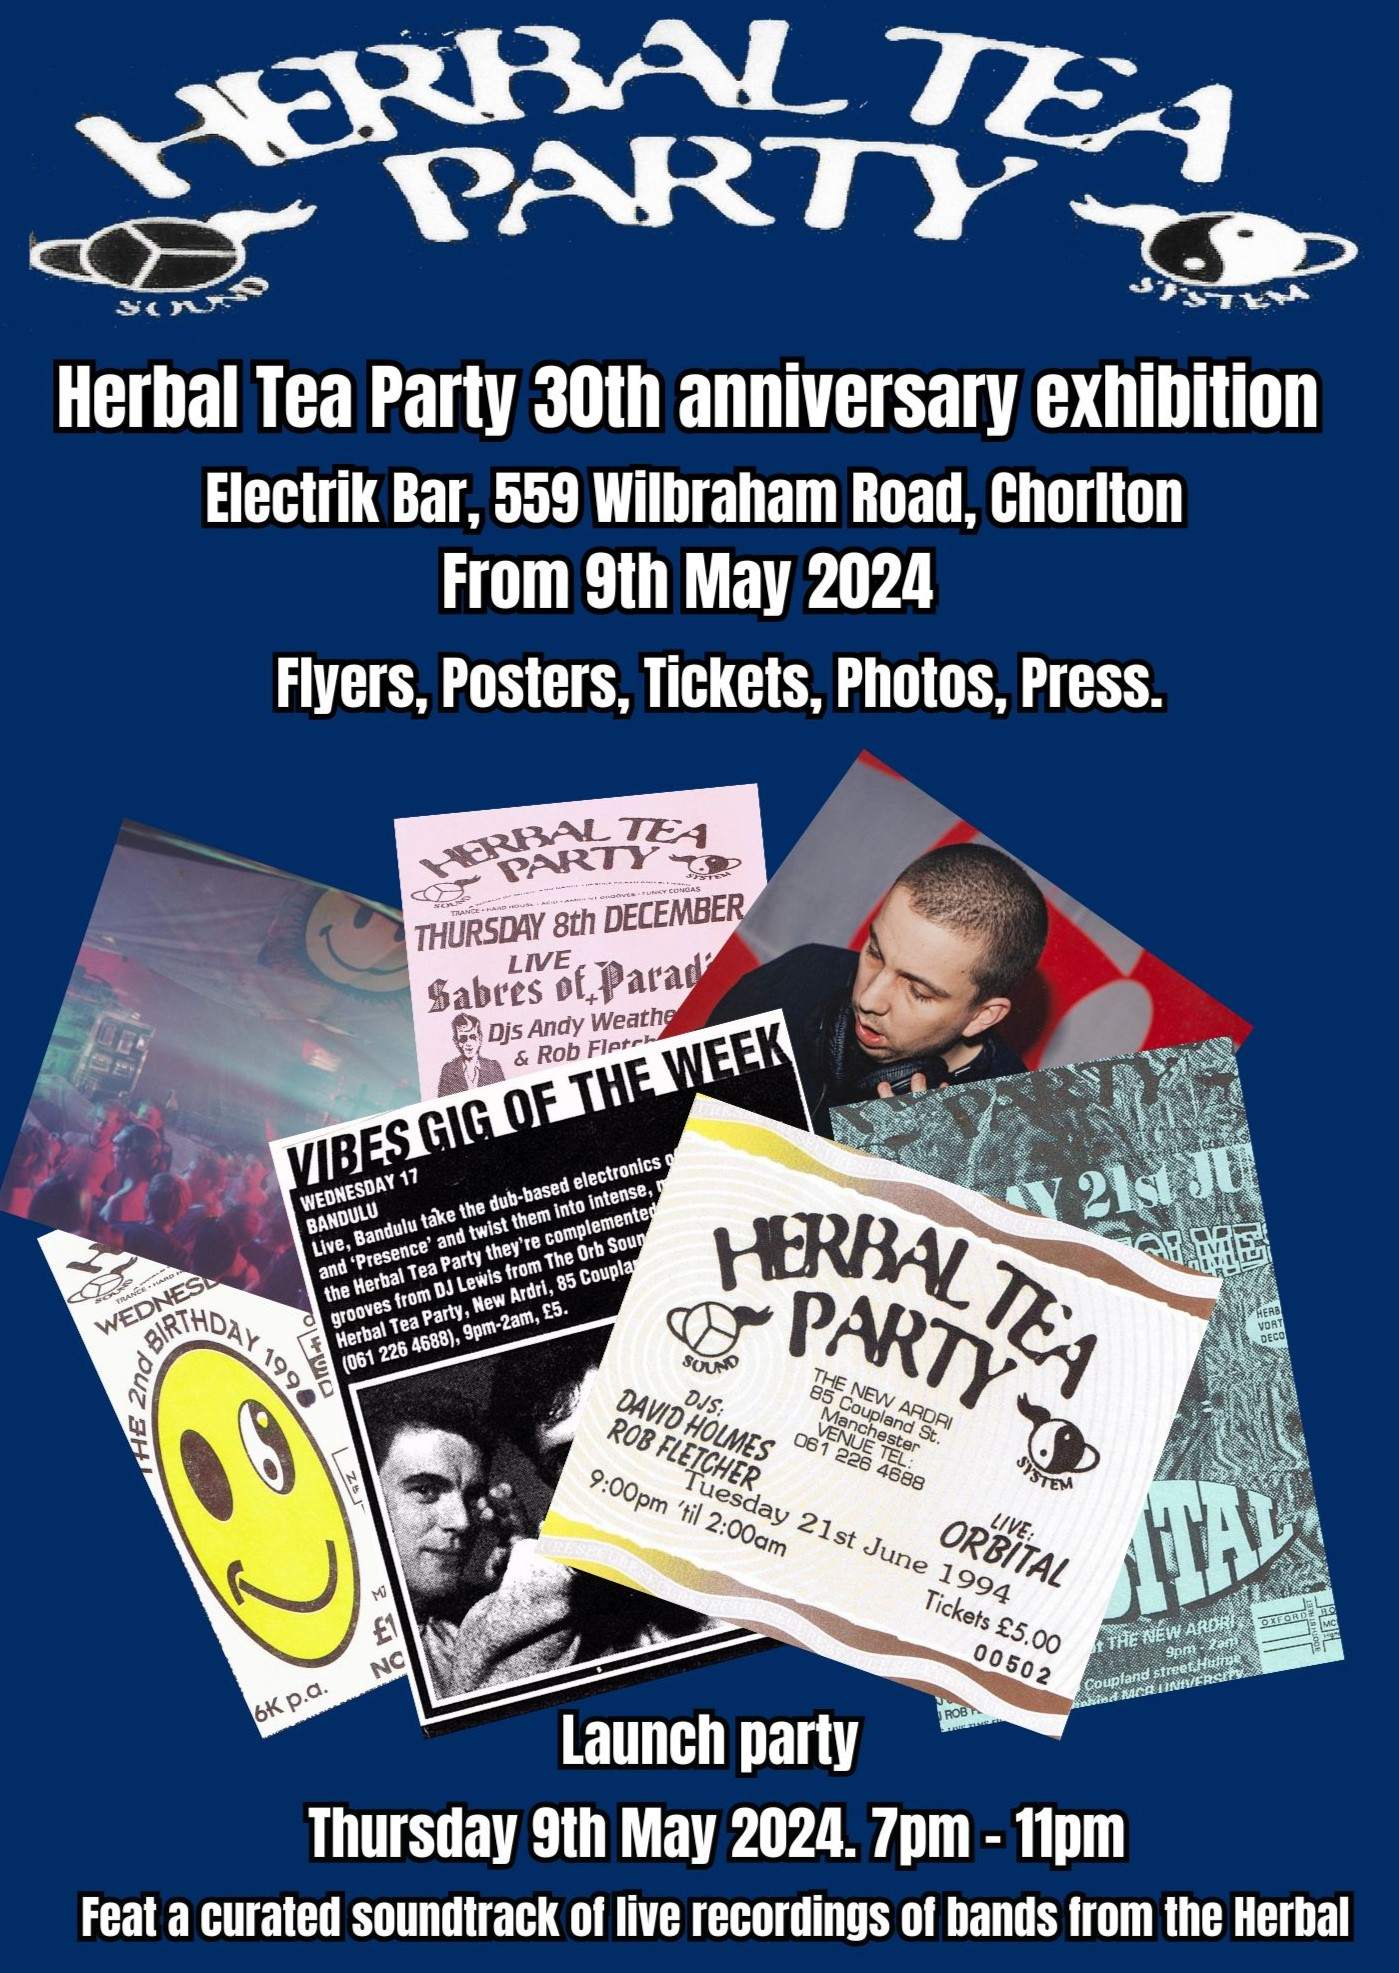 Herbal Tea Party 30th Anniversary exhibition launch party - Página frontal